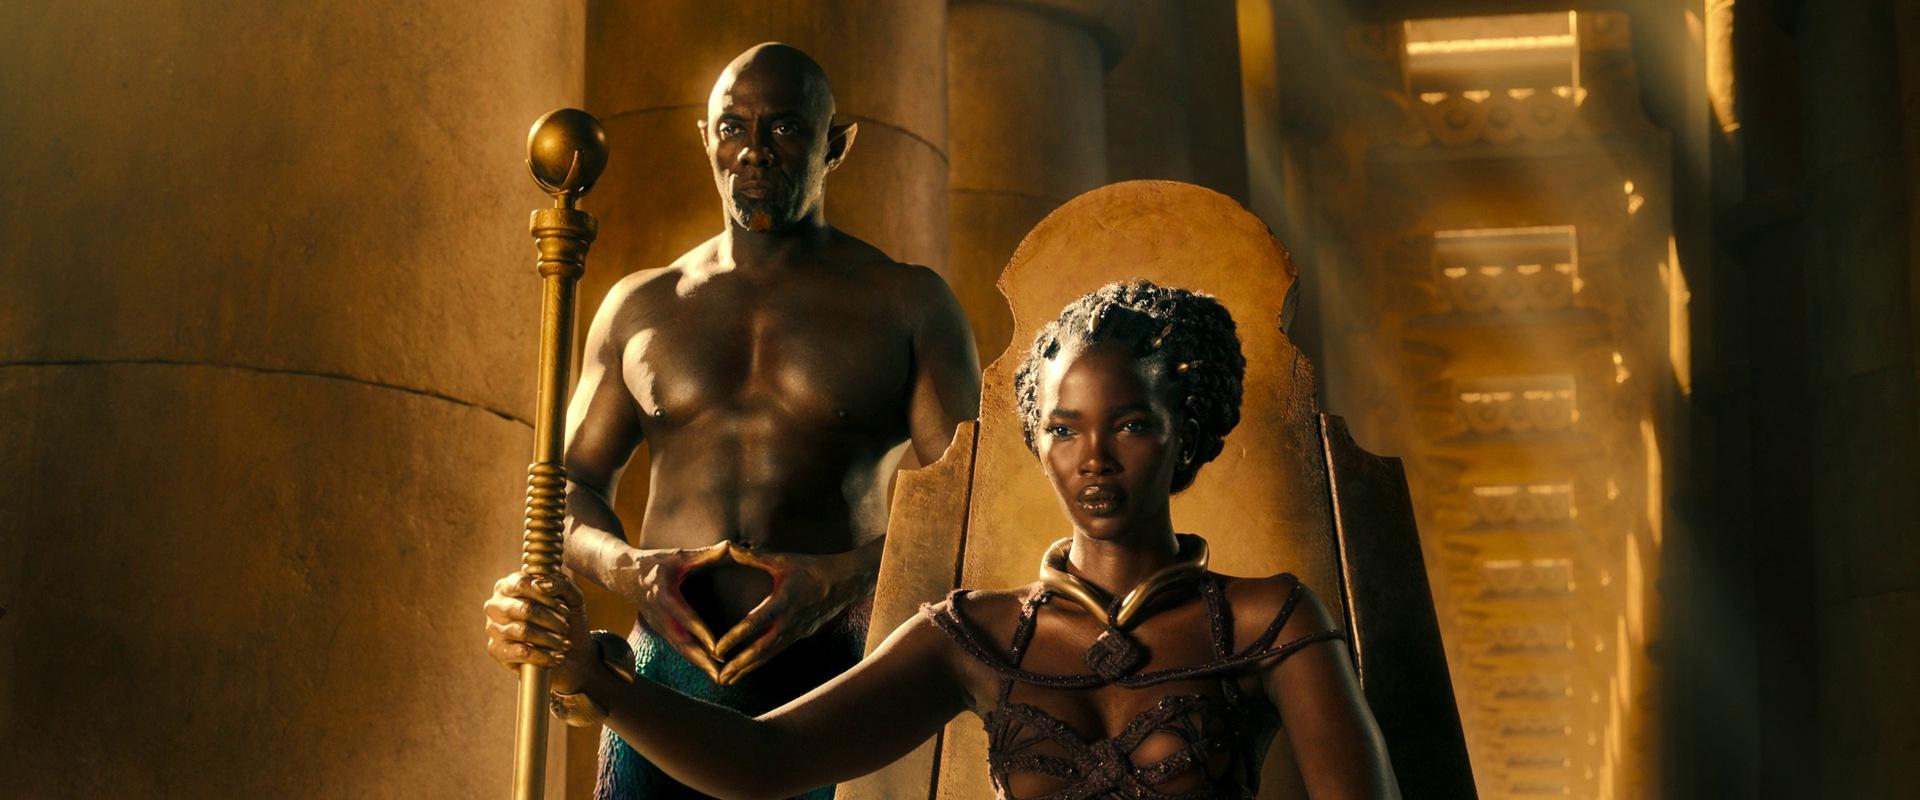 Idris Elba as the Djinn and Aamito Lagum as the Queen of Sheba in Three Thousand Years of Longing